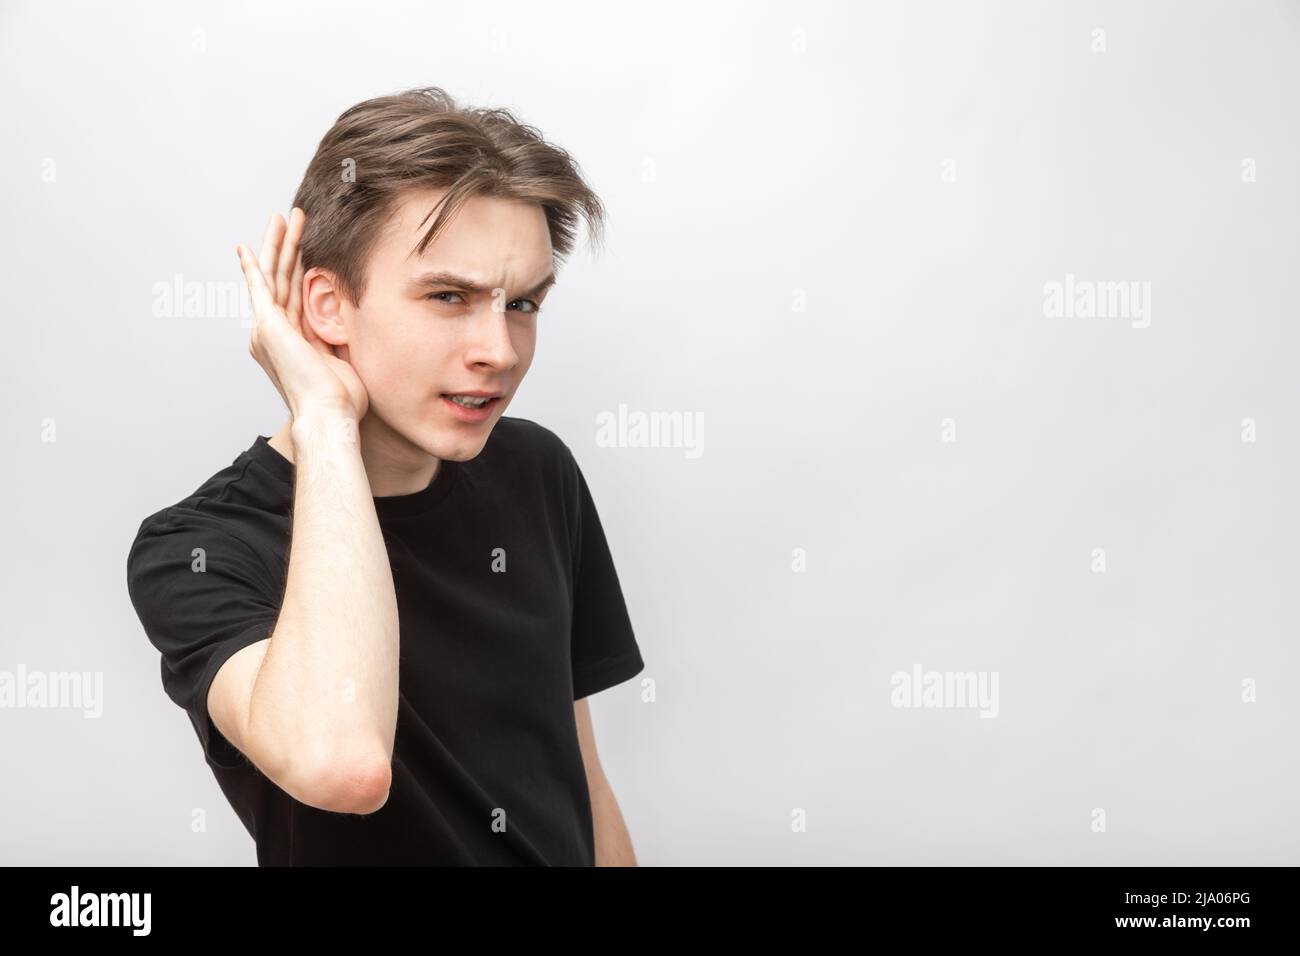 Portrait of young man wearing black tshirt listening holding hand near ear looking at camera. Studio shot on gray background Stock Photo